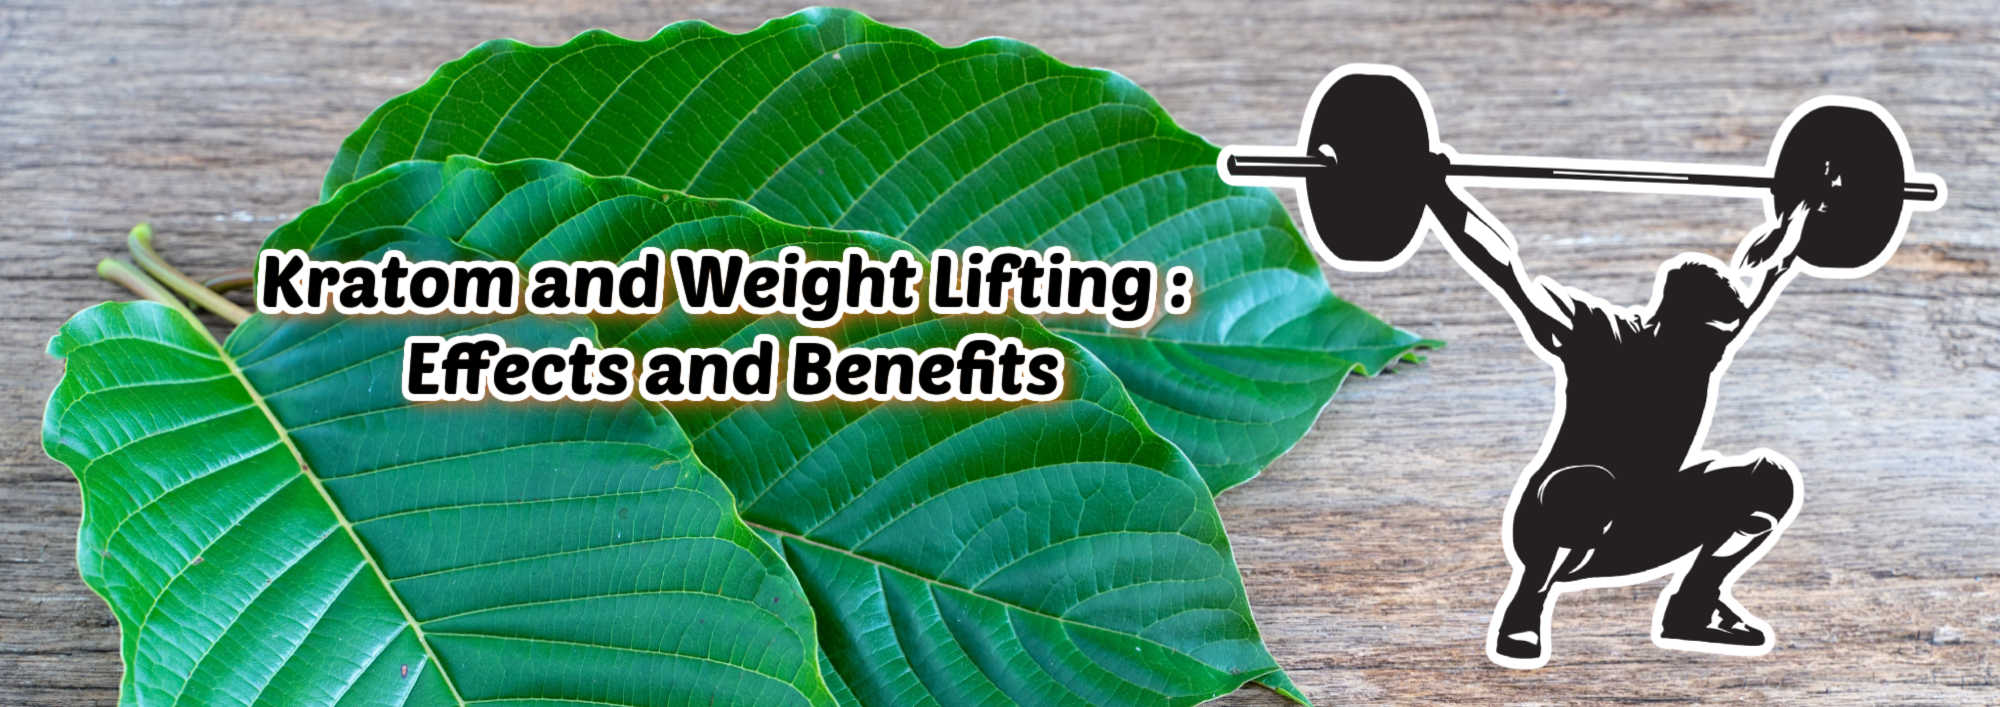 image of kratom and weight lifting